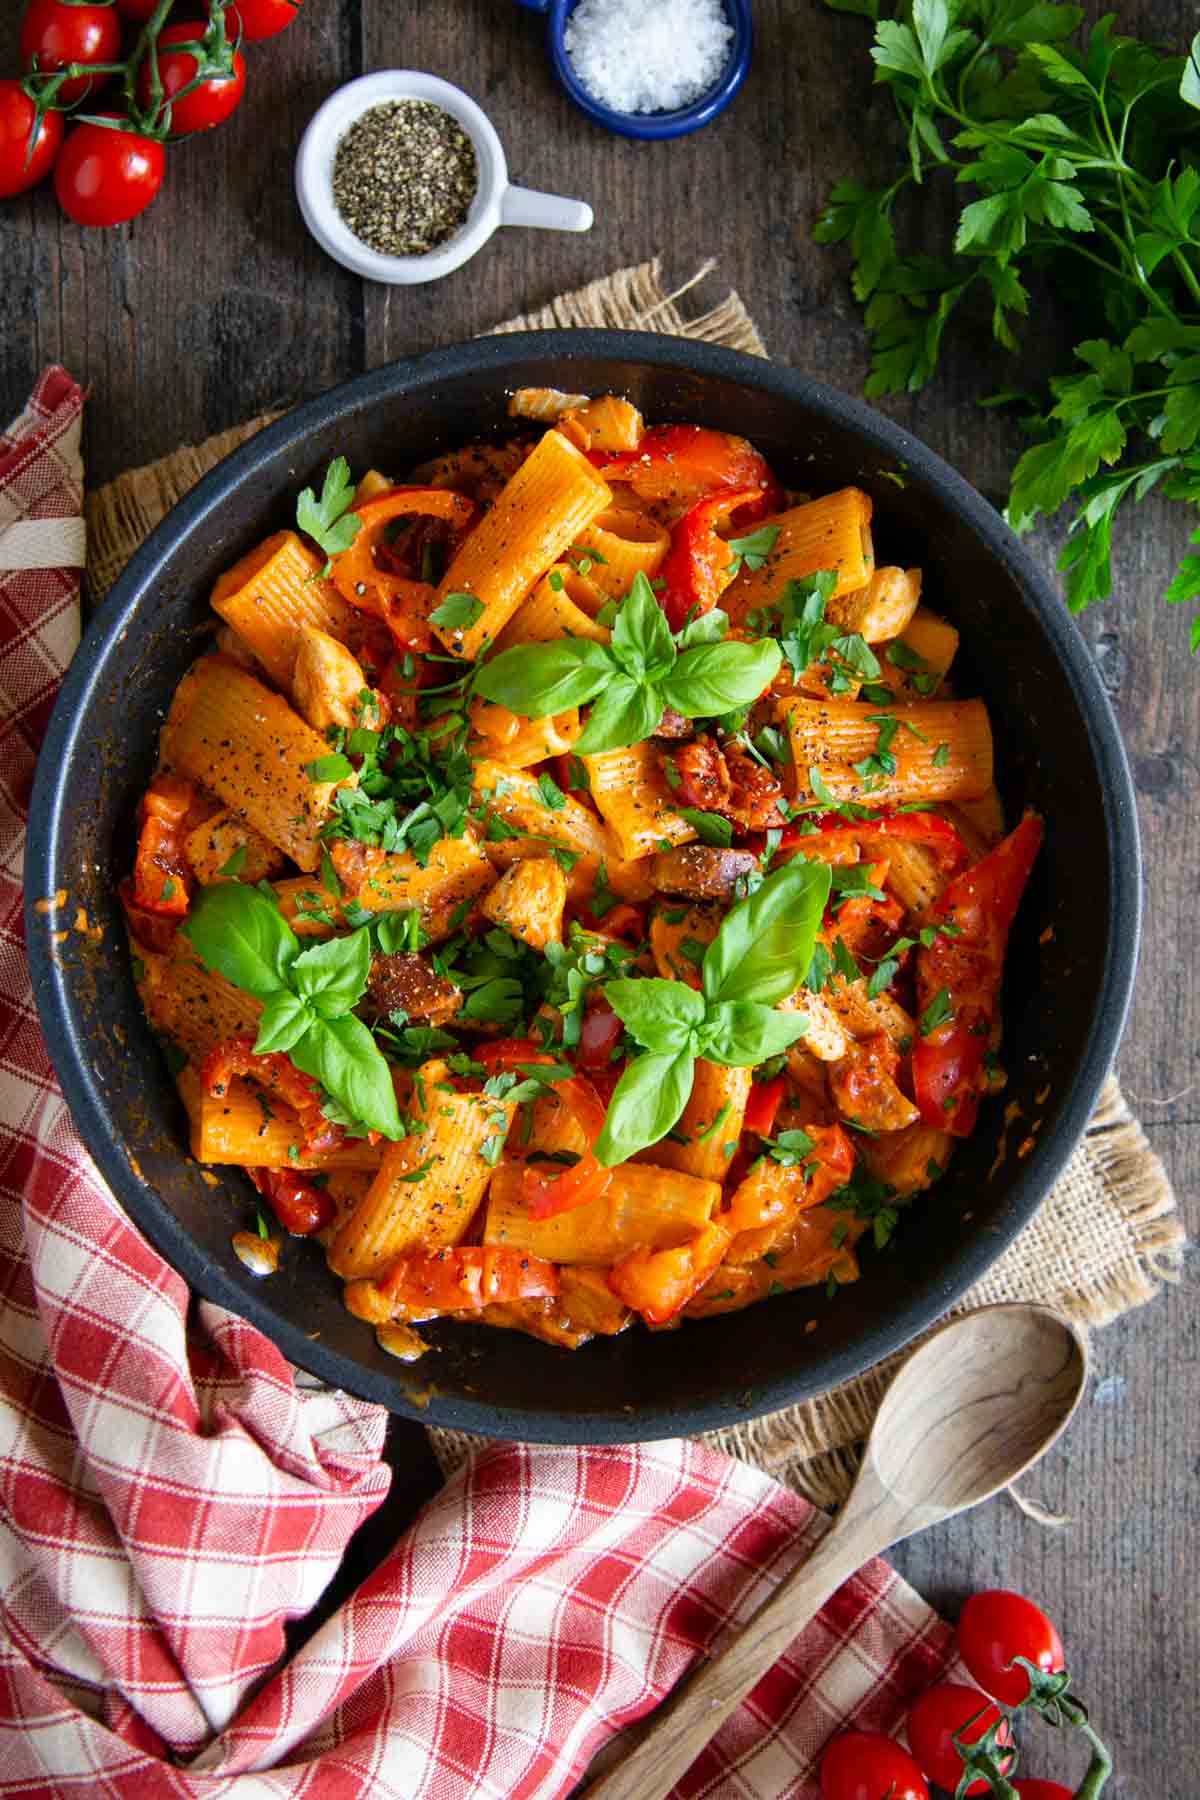 Chicken chorizo pasta, rigatoni in a rich red sauce flecked with peppers, dark slices of chorizo and a scattering of fresh green herbs.